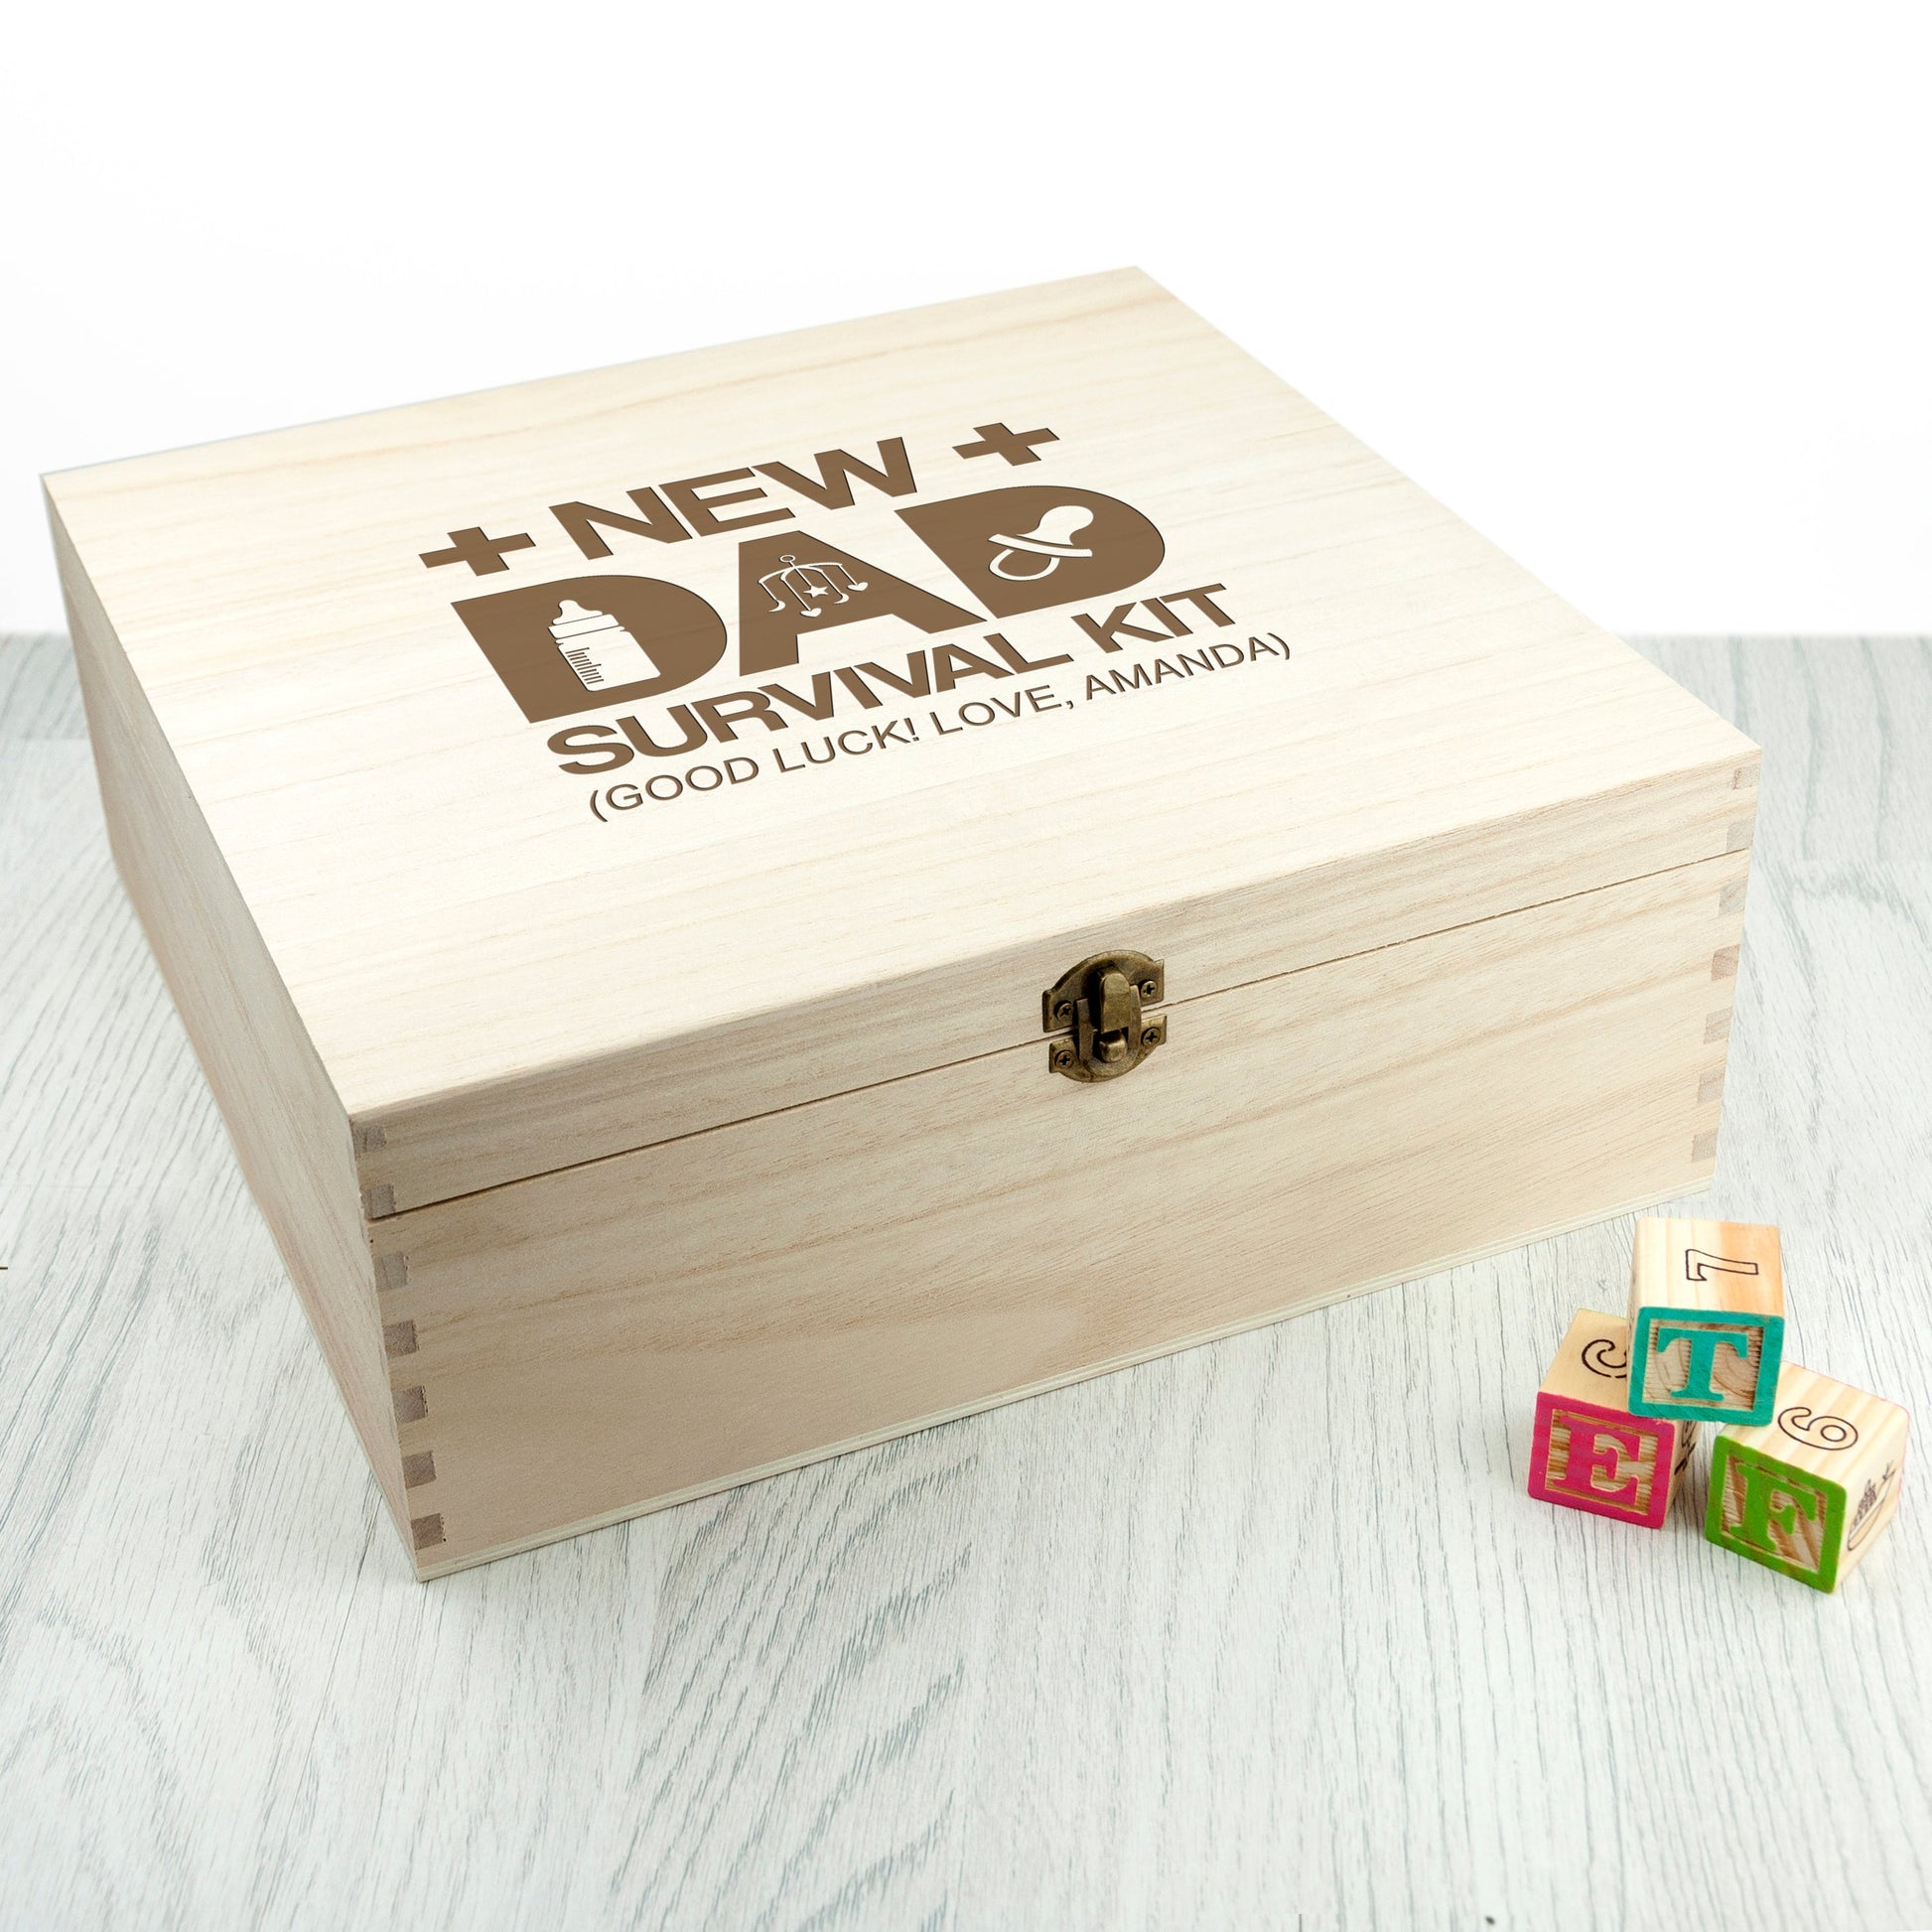 Personalized Boxes for Dad - Personalized Fill Your Own New Dad Survival Box 